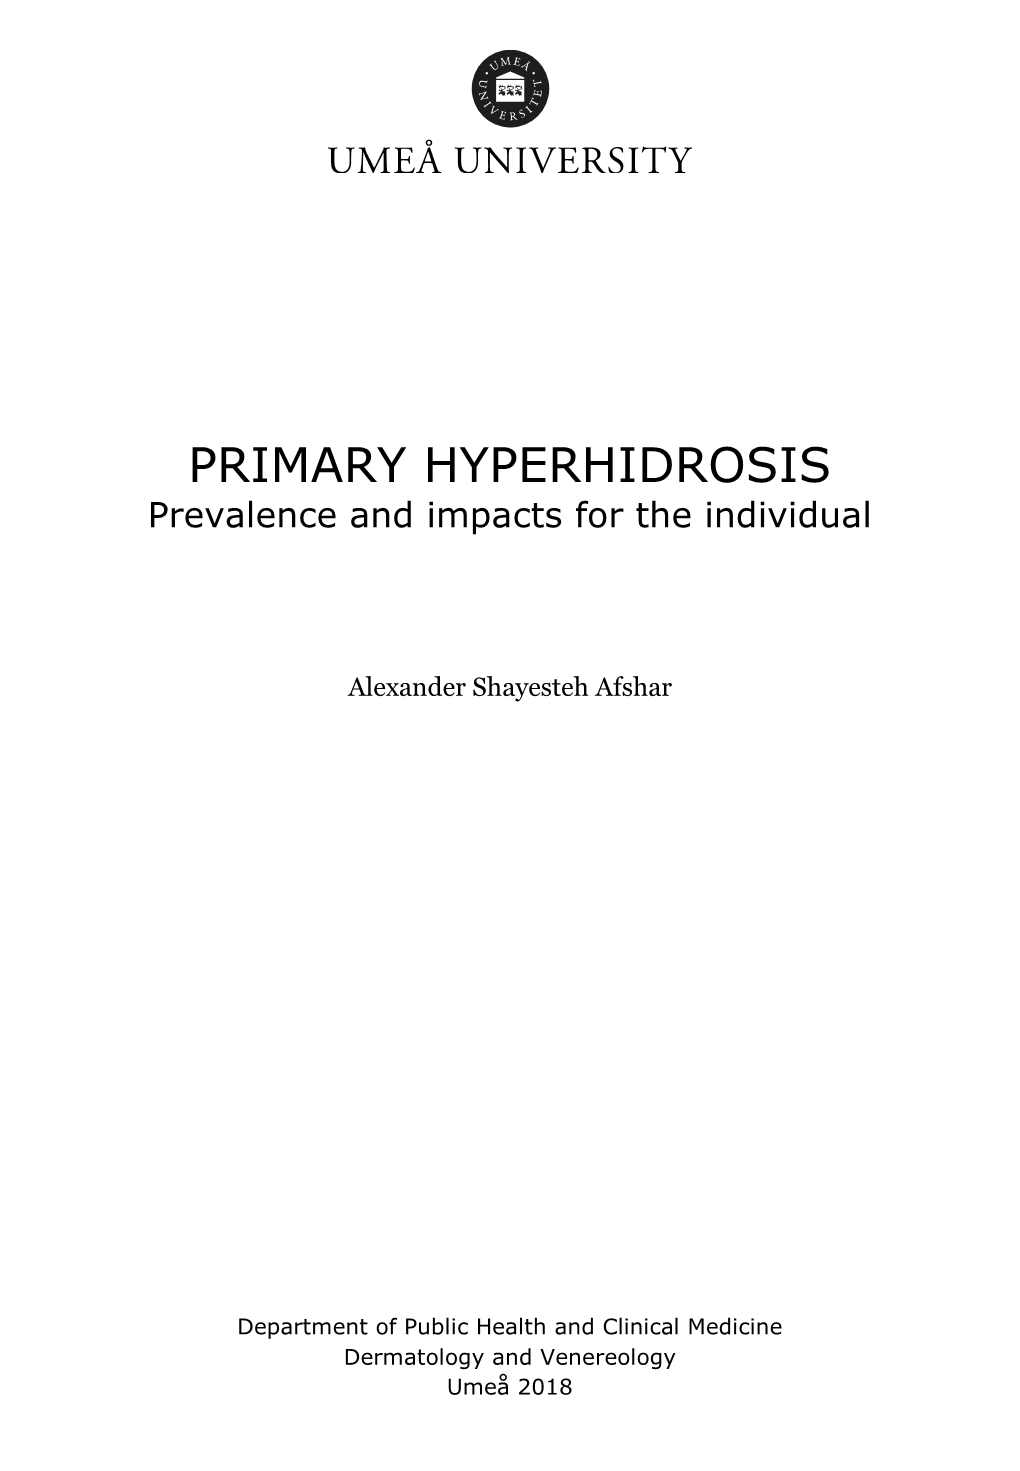 PRIMARY HYPERHIDROSIS Prevalence and Impacts for the Individual